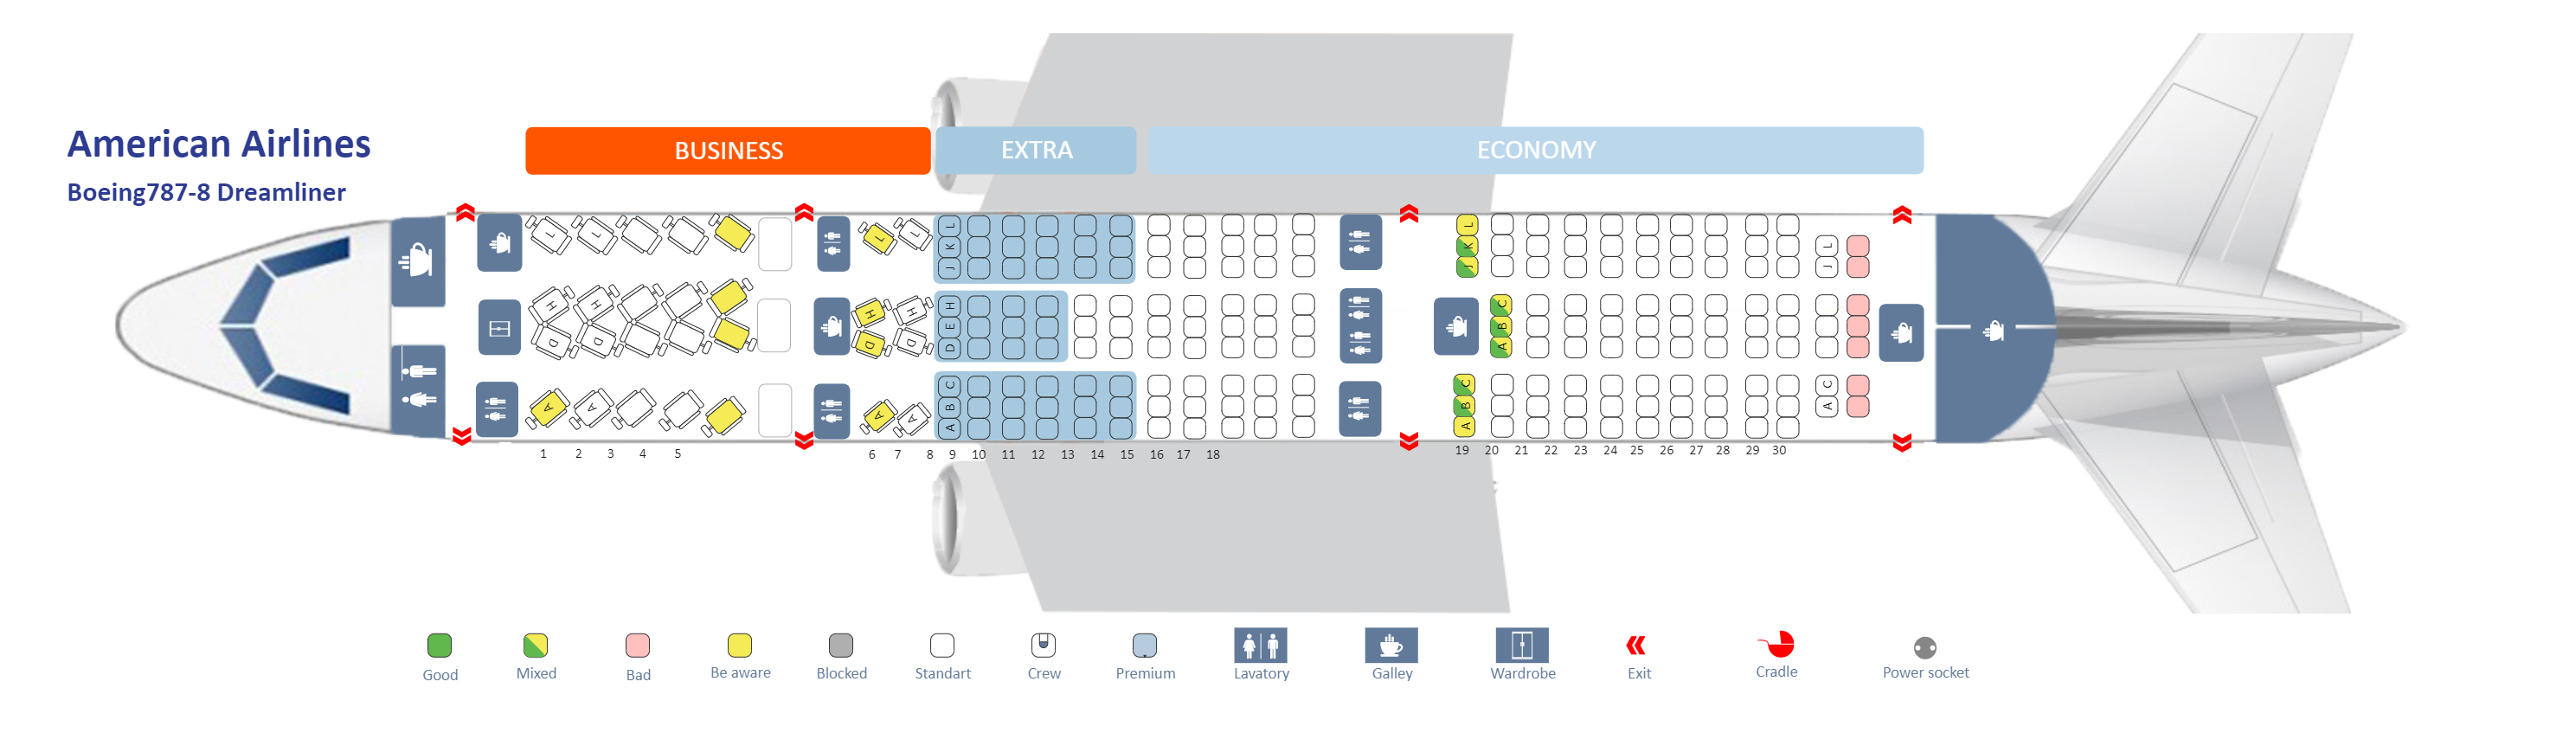 American Airlines Seating Chart